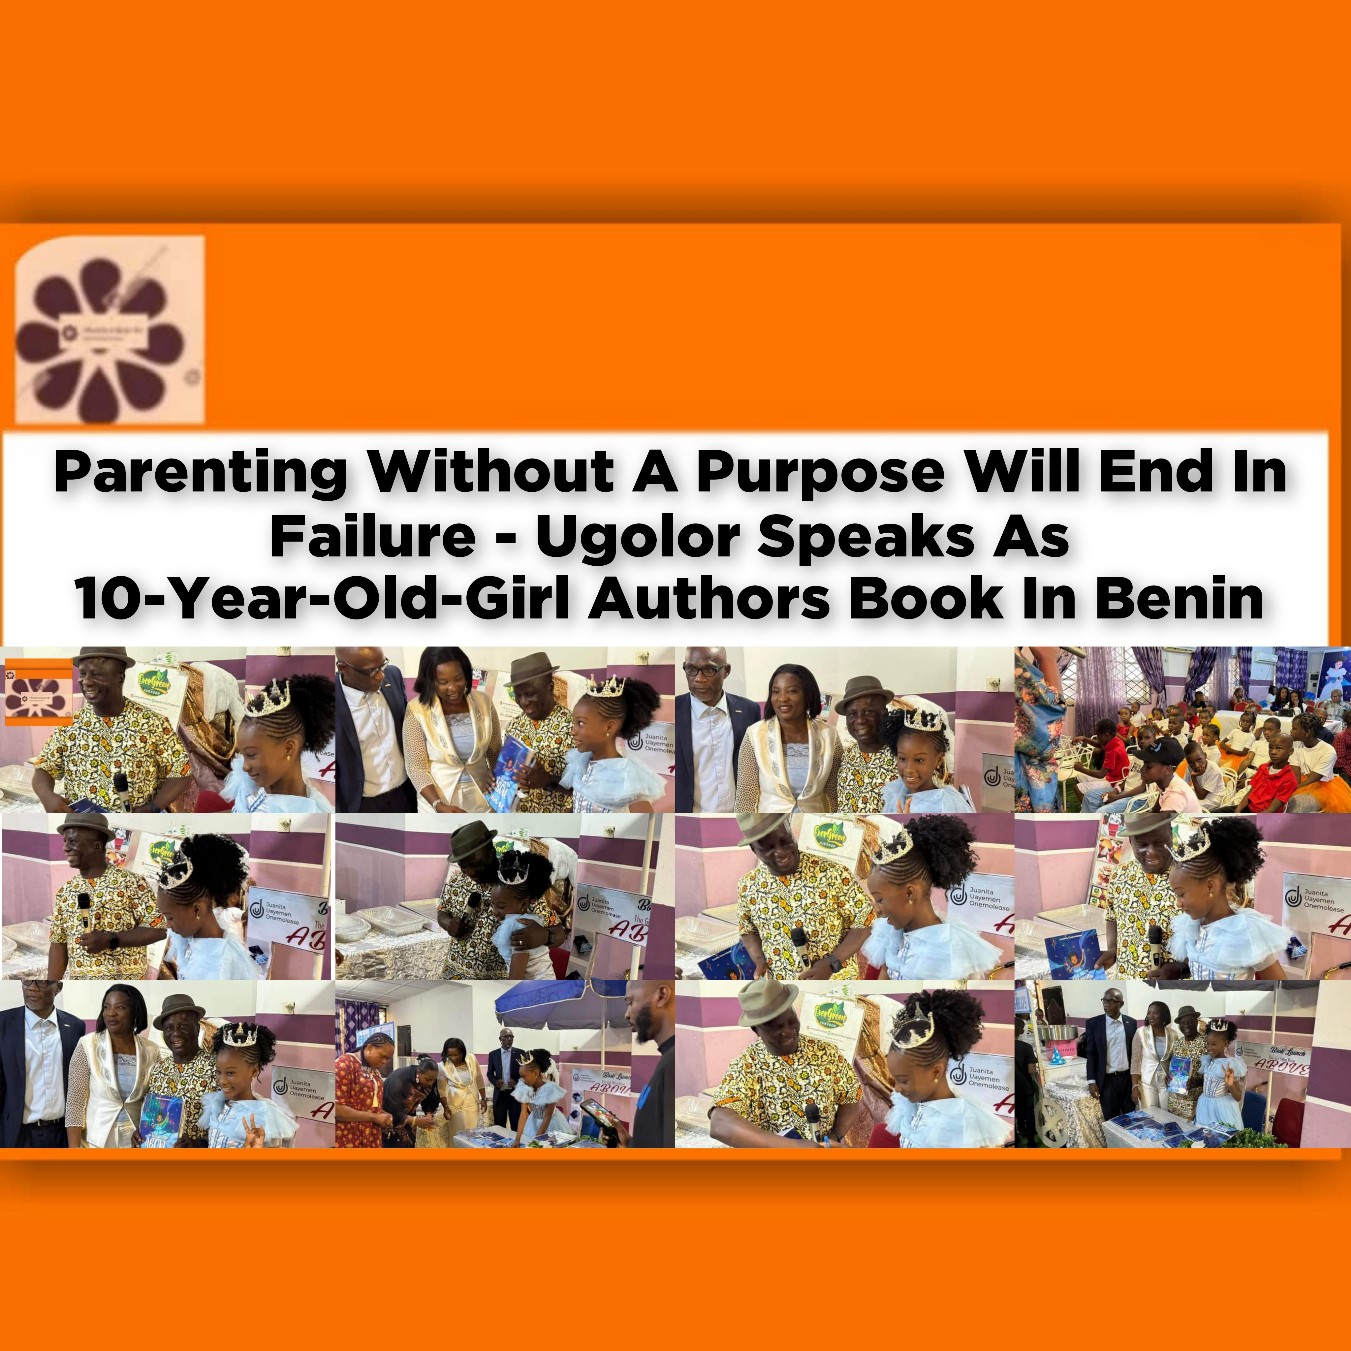 Parenting Without A Purpose Will End In Failure - Ugolor Speaks As 10-Year-Old-Girl Authors Book In Benin ~ OsazuwaAkonedo #Goodwin